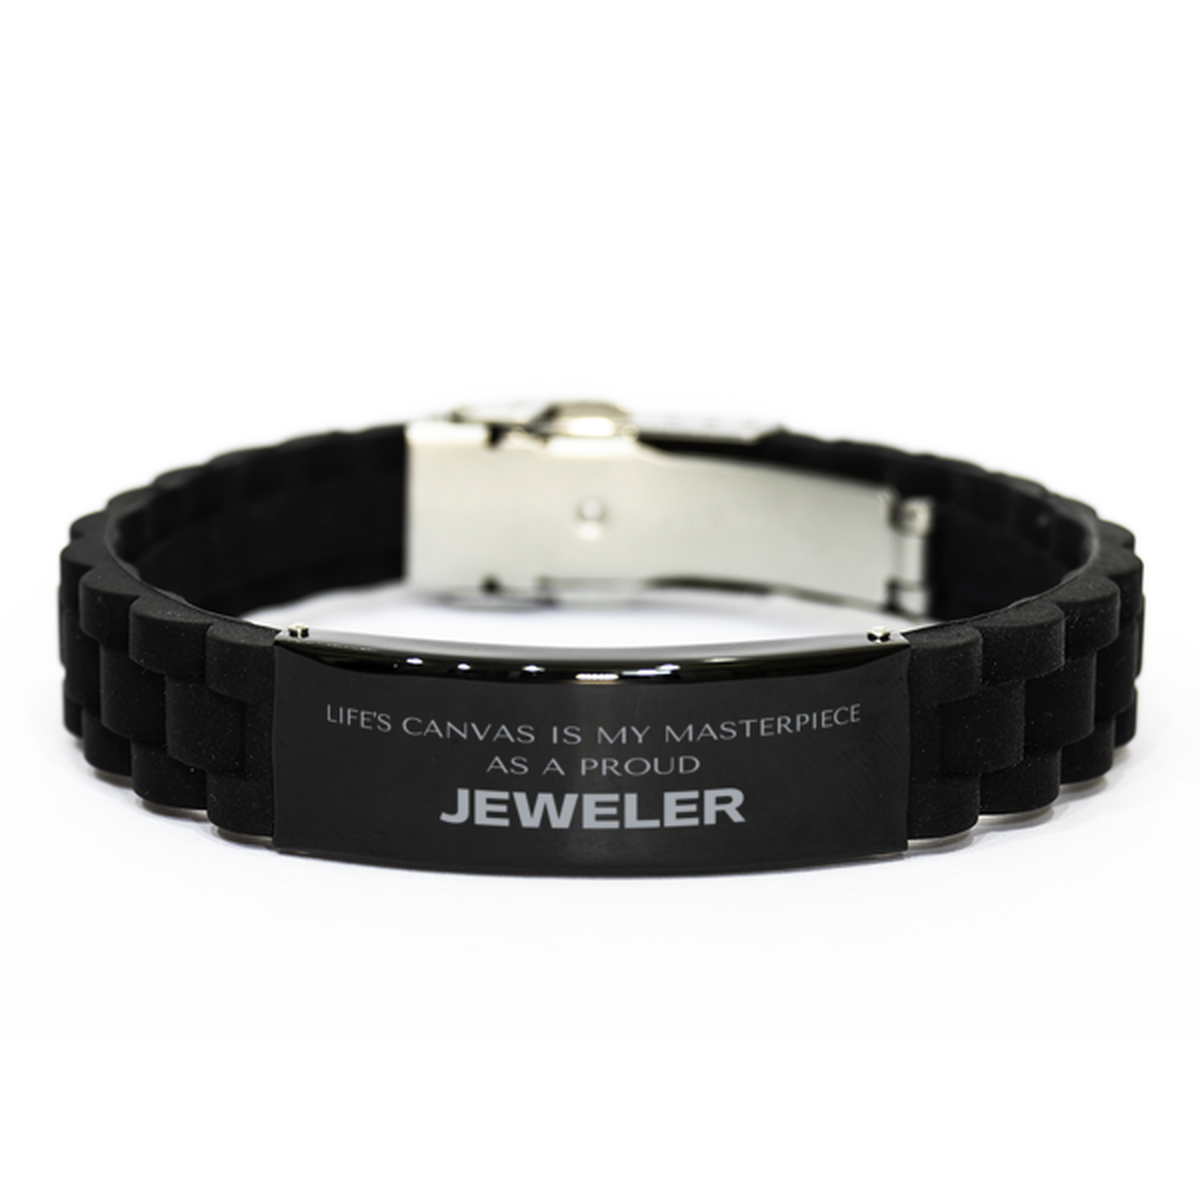 Proud Jeweler Gifts, Life's canvas is my masterpiece, Epic Birthday Christmas Unique Black Glidelock Clasp Bracelet For Jeweler, Coworkers, Men, Women, Friends